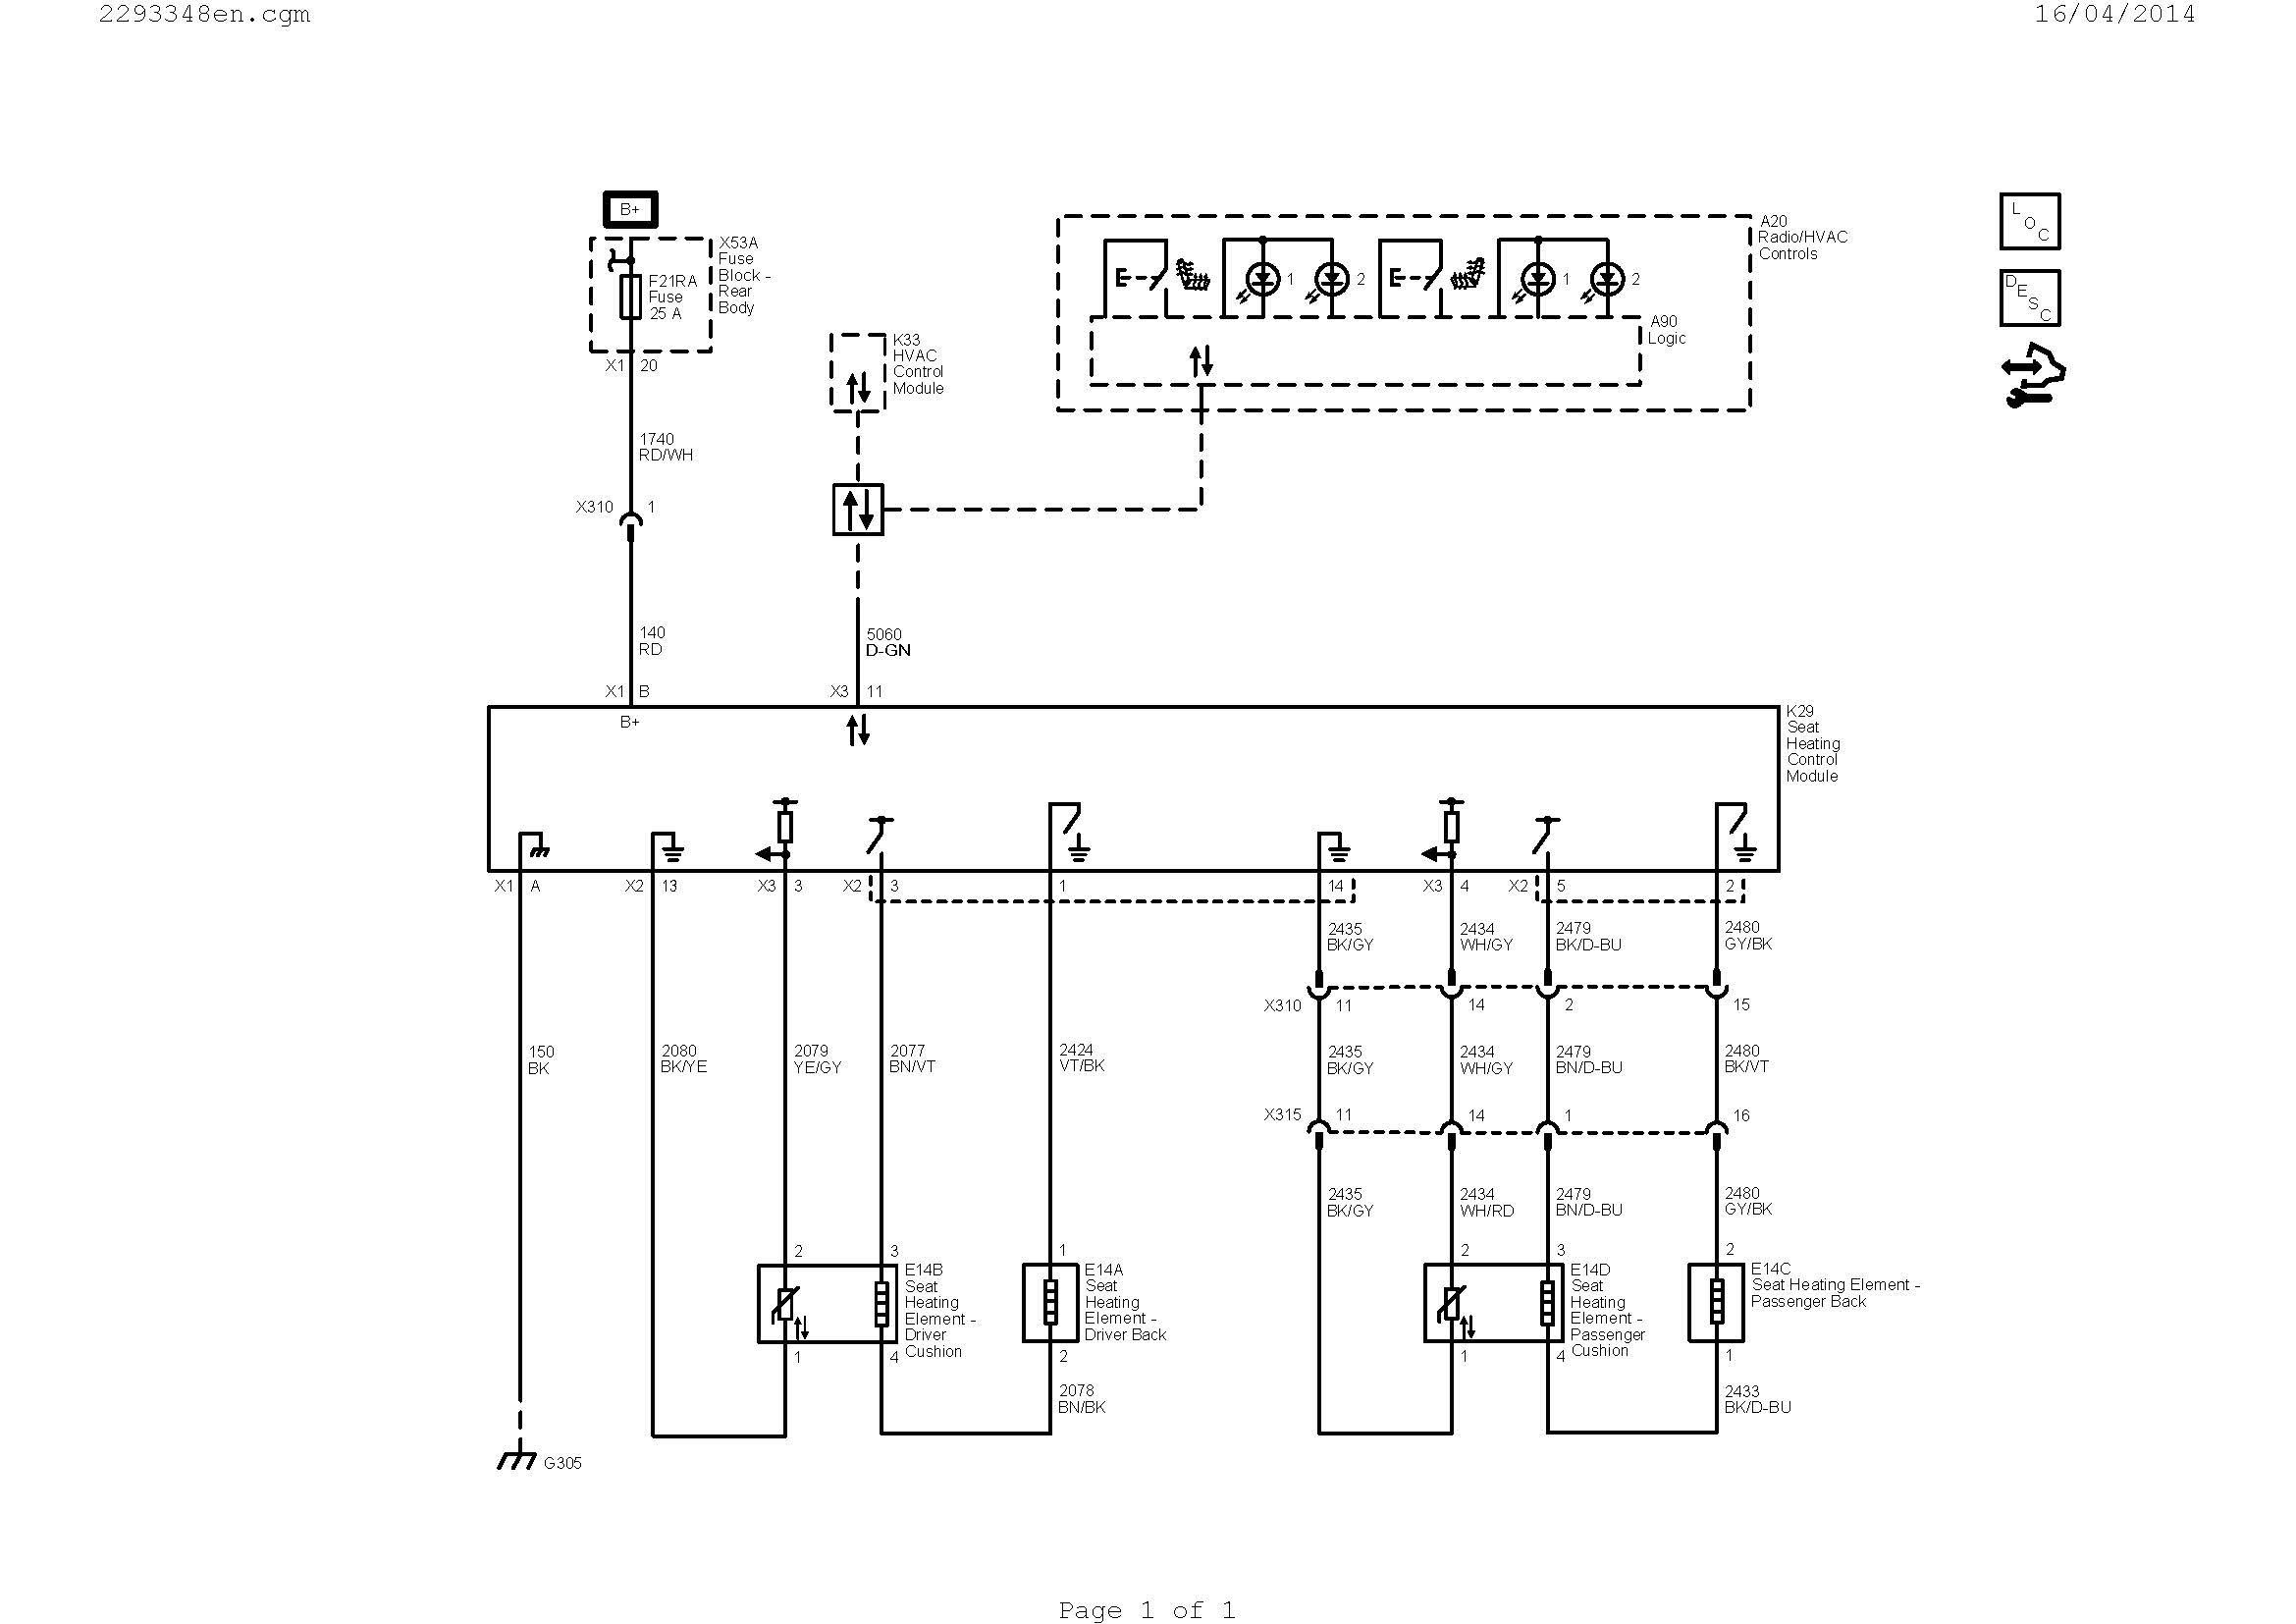 home thermostat wiring diagram Collection Wiring A Ac Thermostat Diagram New Wiring Diagram Ac Valid DOWNLOAD Wiring Diagram